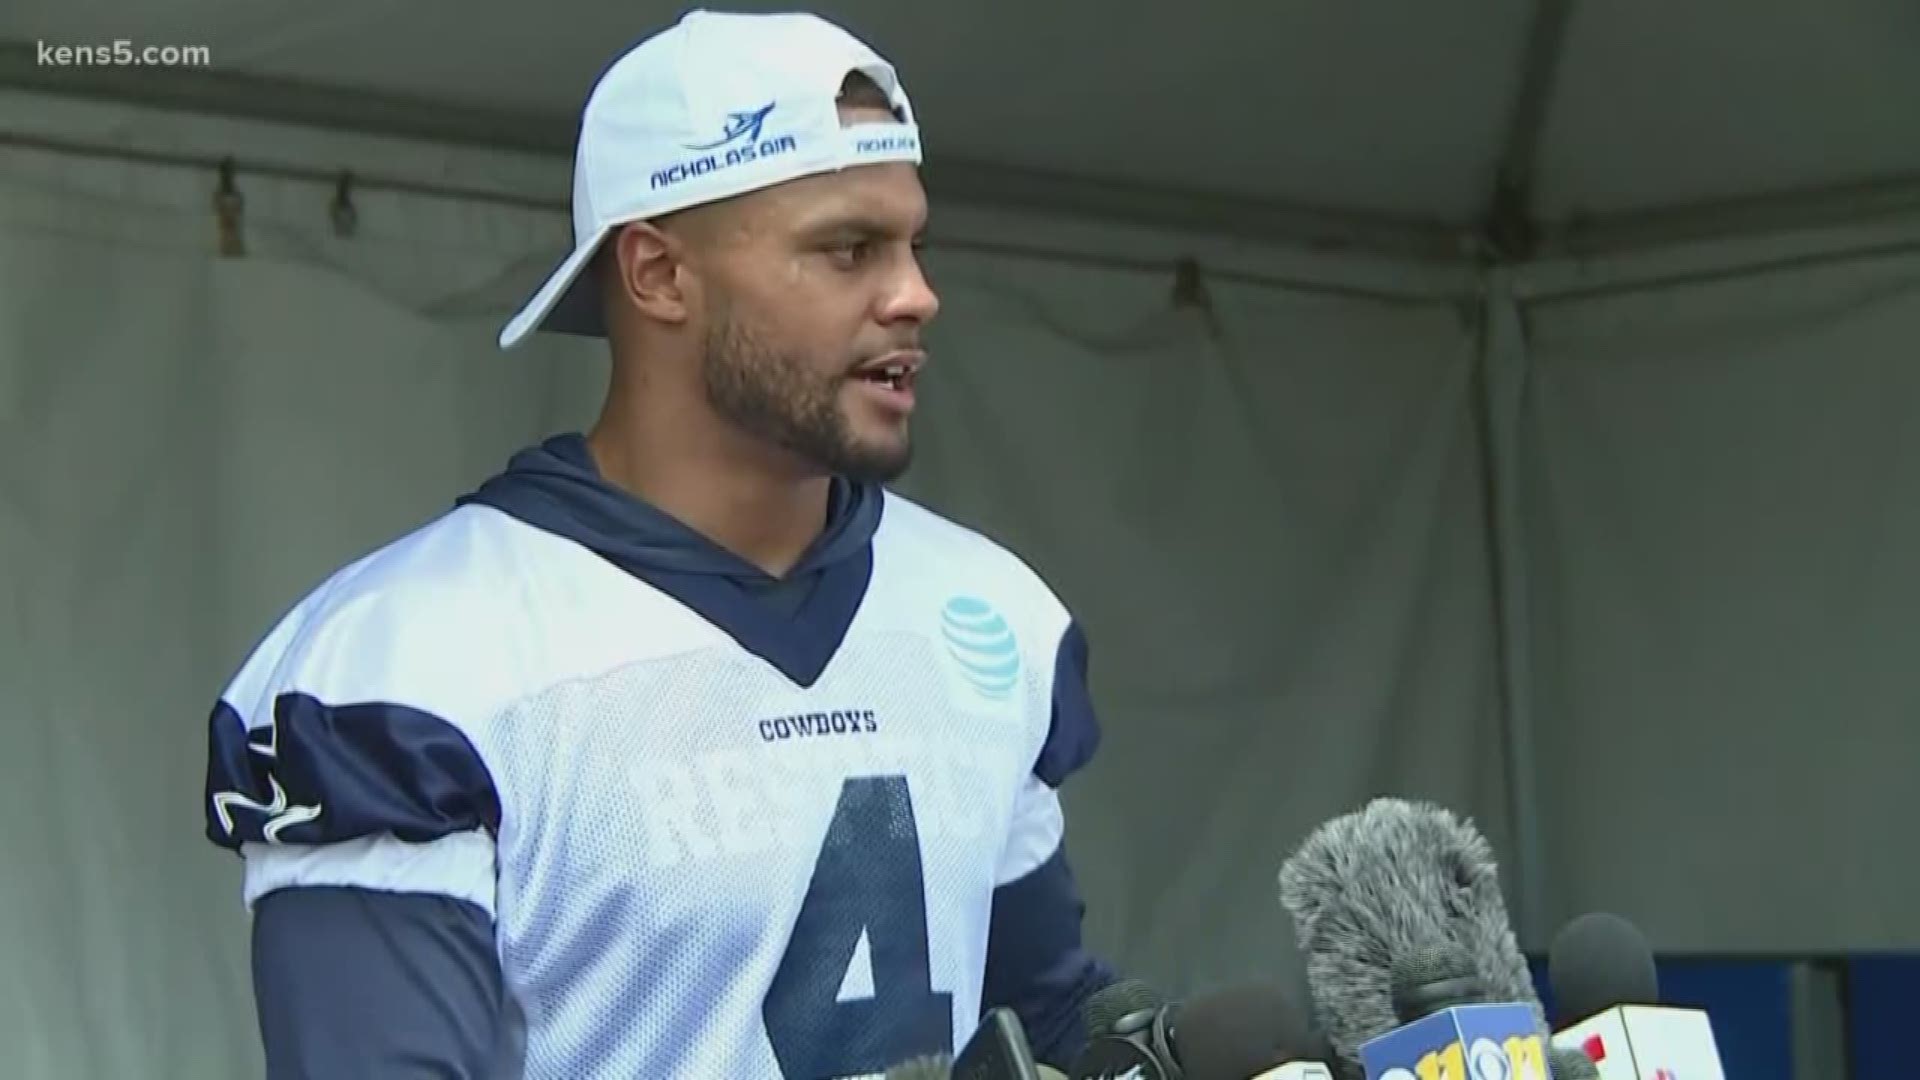 Dak Prescott took an unprecedented, firm stance on protests during the national anthem.